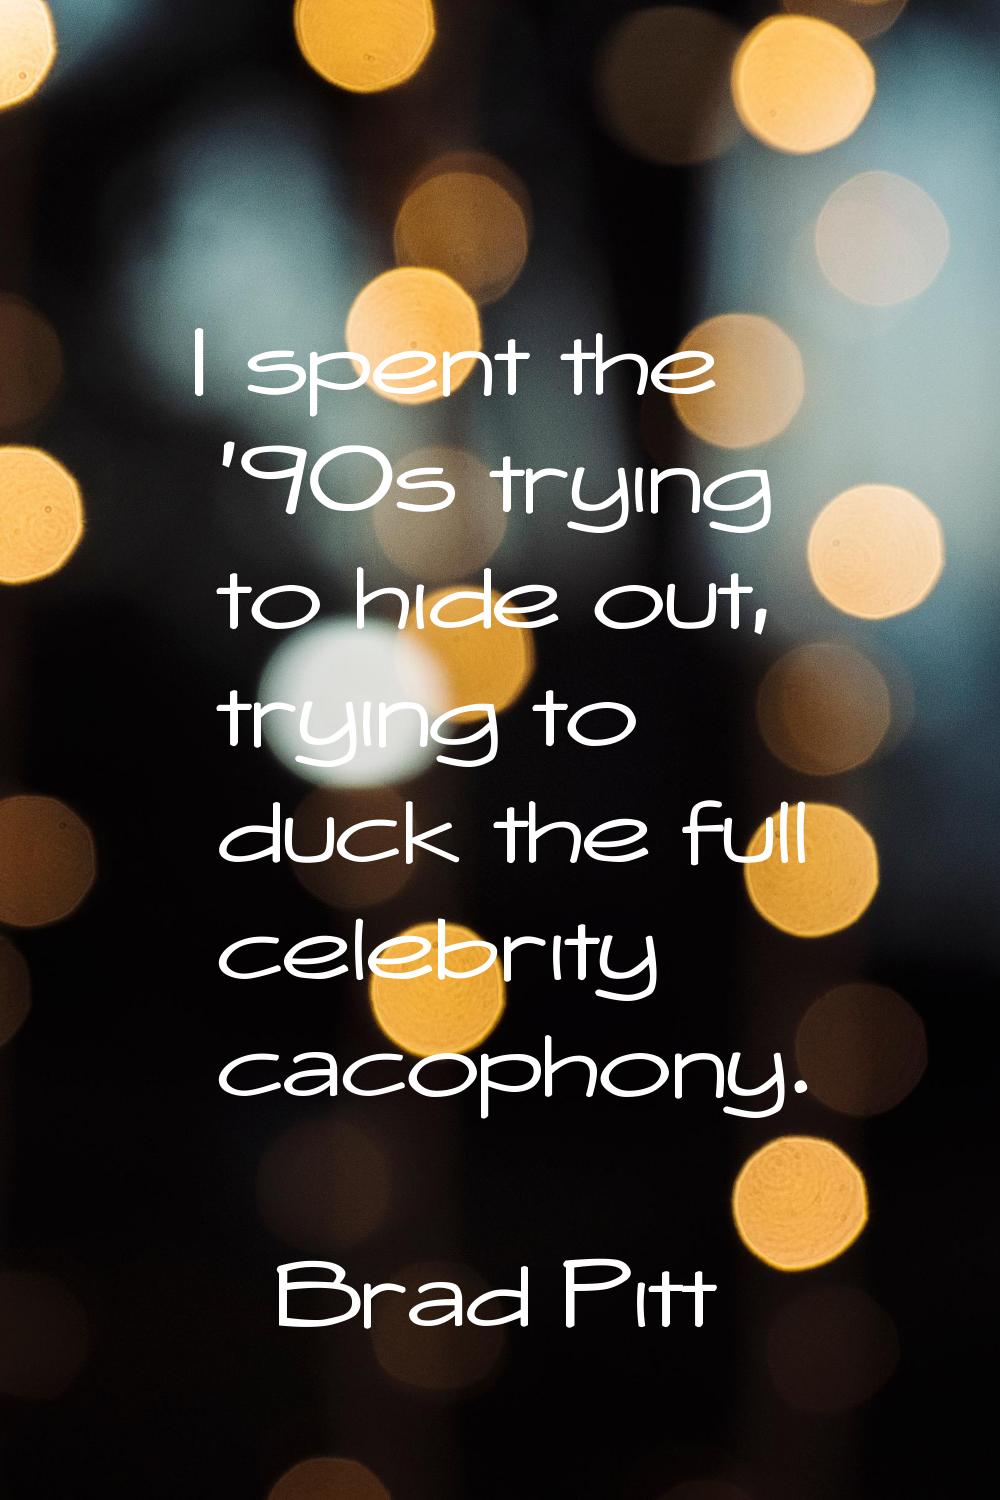 I spent the '90s trying to hide out, trying to duck the full celebrity cacophony.